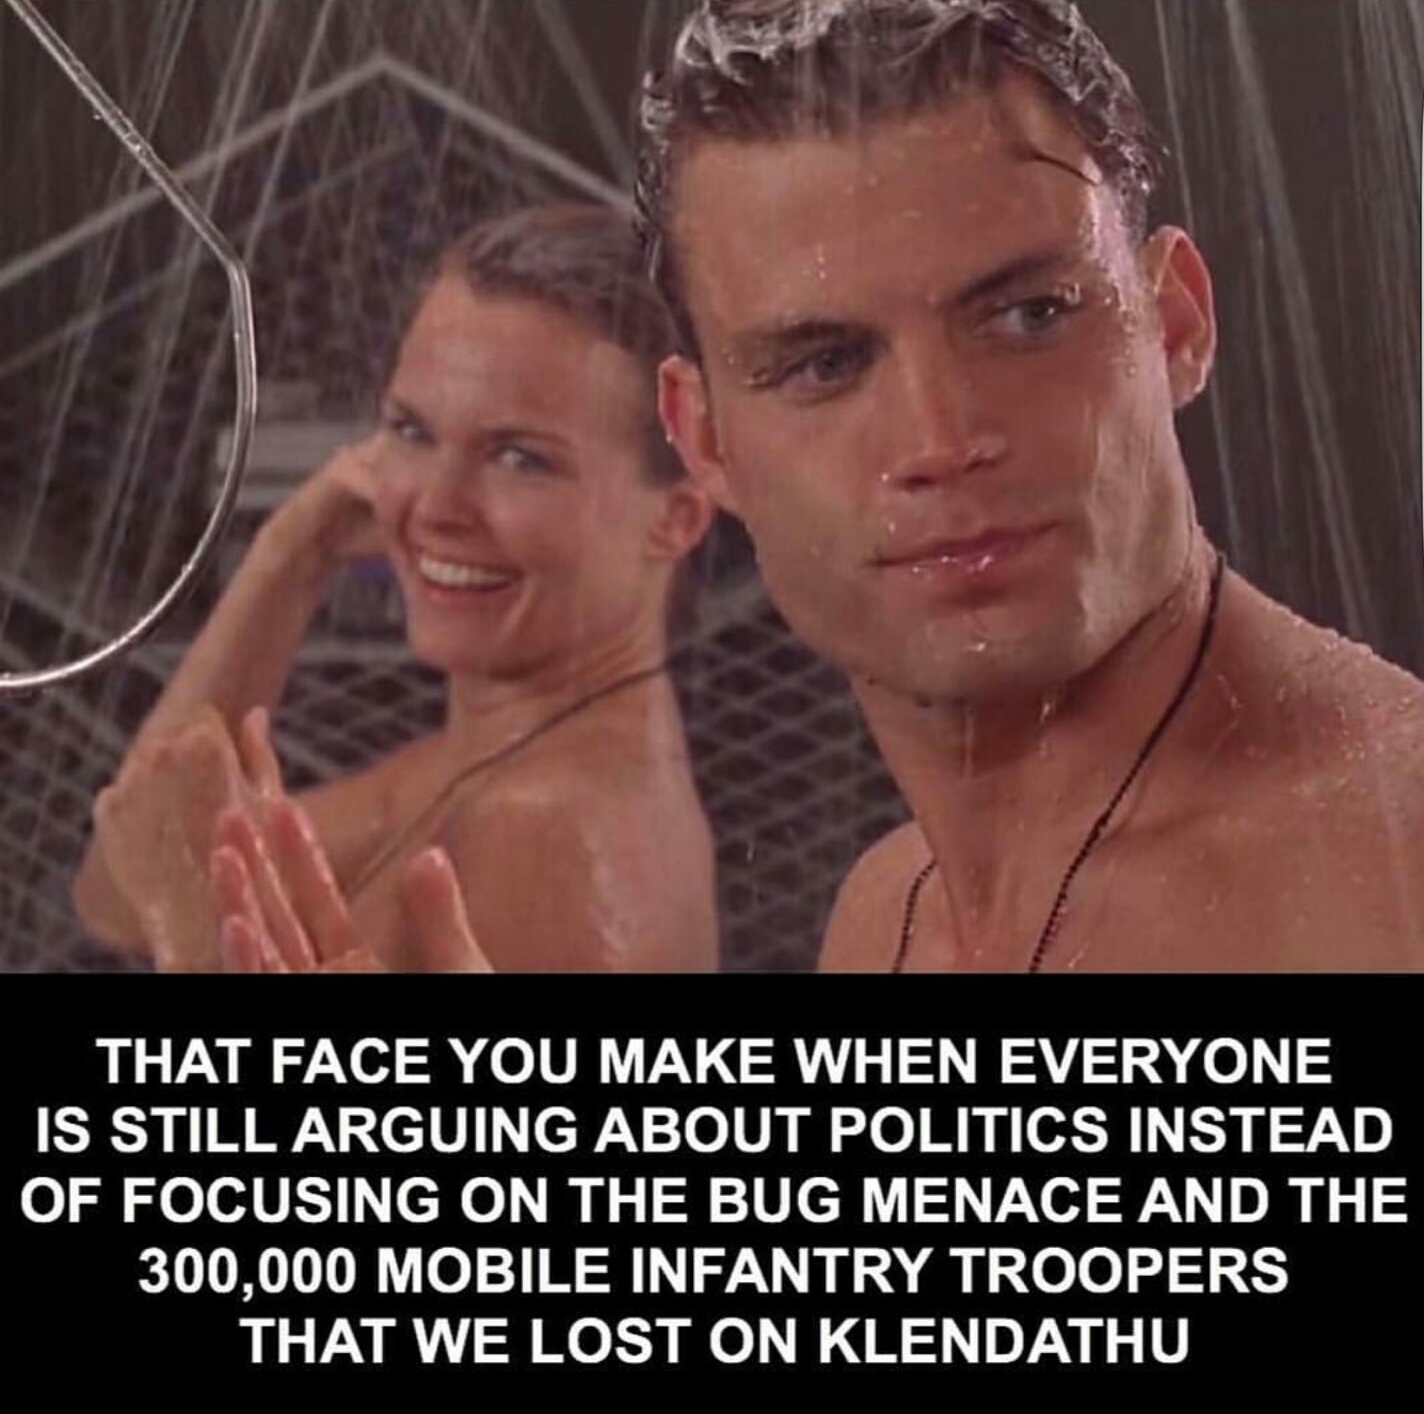 Starship Troopers meme of that look you give when everyone is arguing politics instead of focusing on the bug menace and the 300,000 troops lost on Klendathu